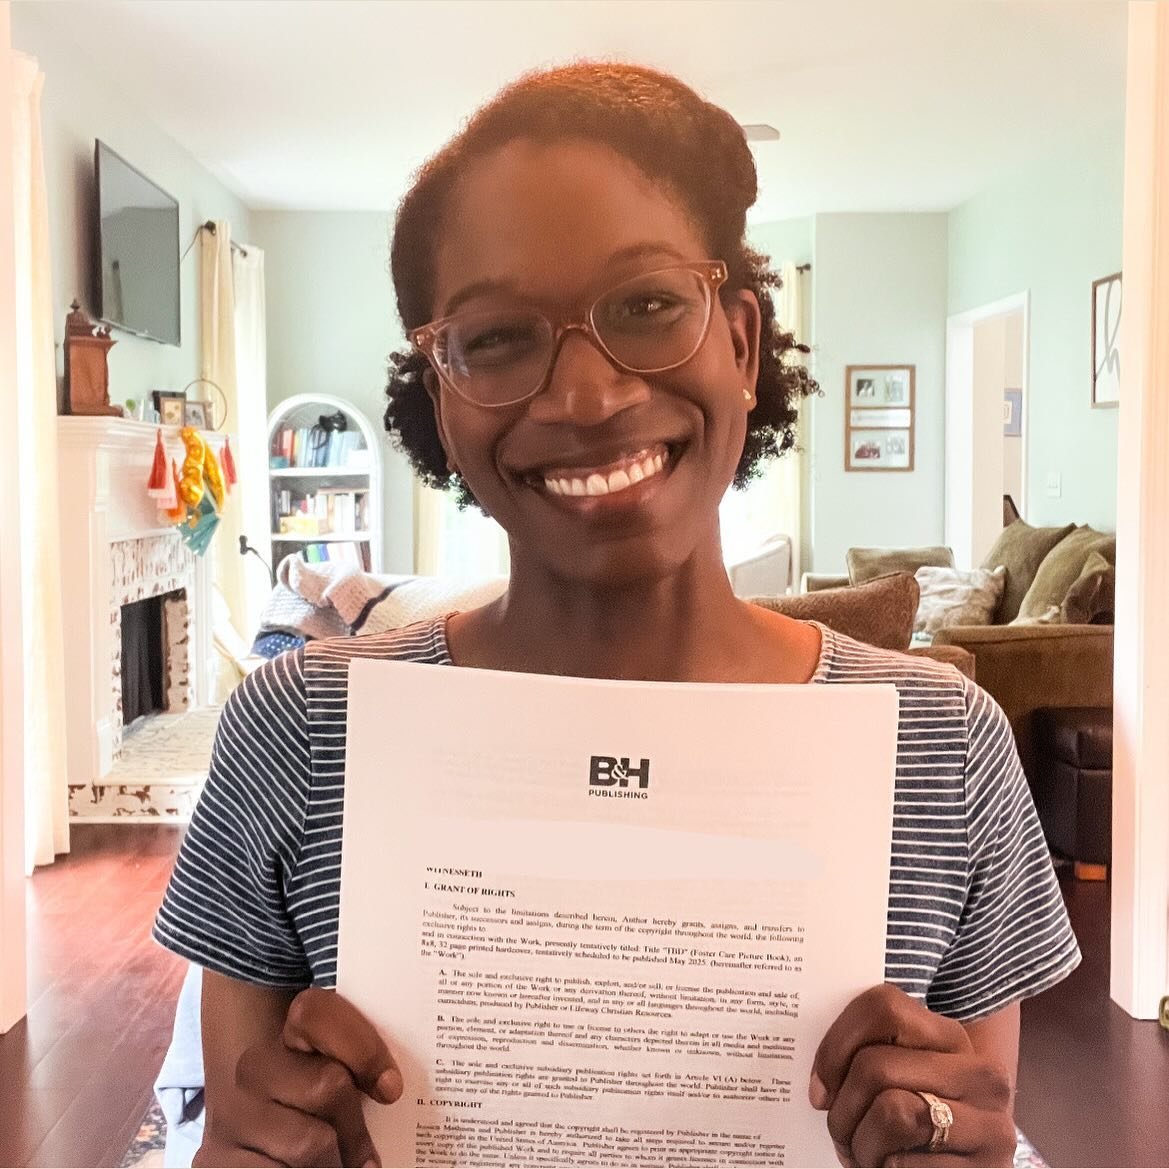 🥳 BIG NEWS TO SHARE! 🥳

I have officially signed a contract to write a children&rsquo;s book with B&amp;H Publishing that will (Lord willing) be released in the spring of 2025! I cannot tell you how excited and grateful I am for this opportunity. 
